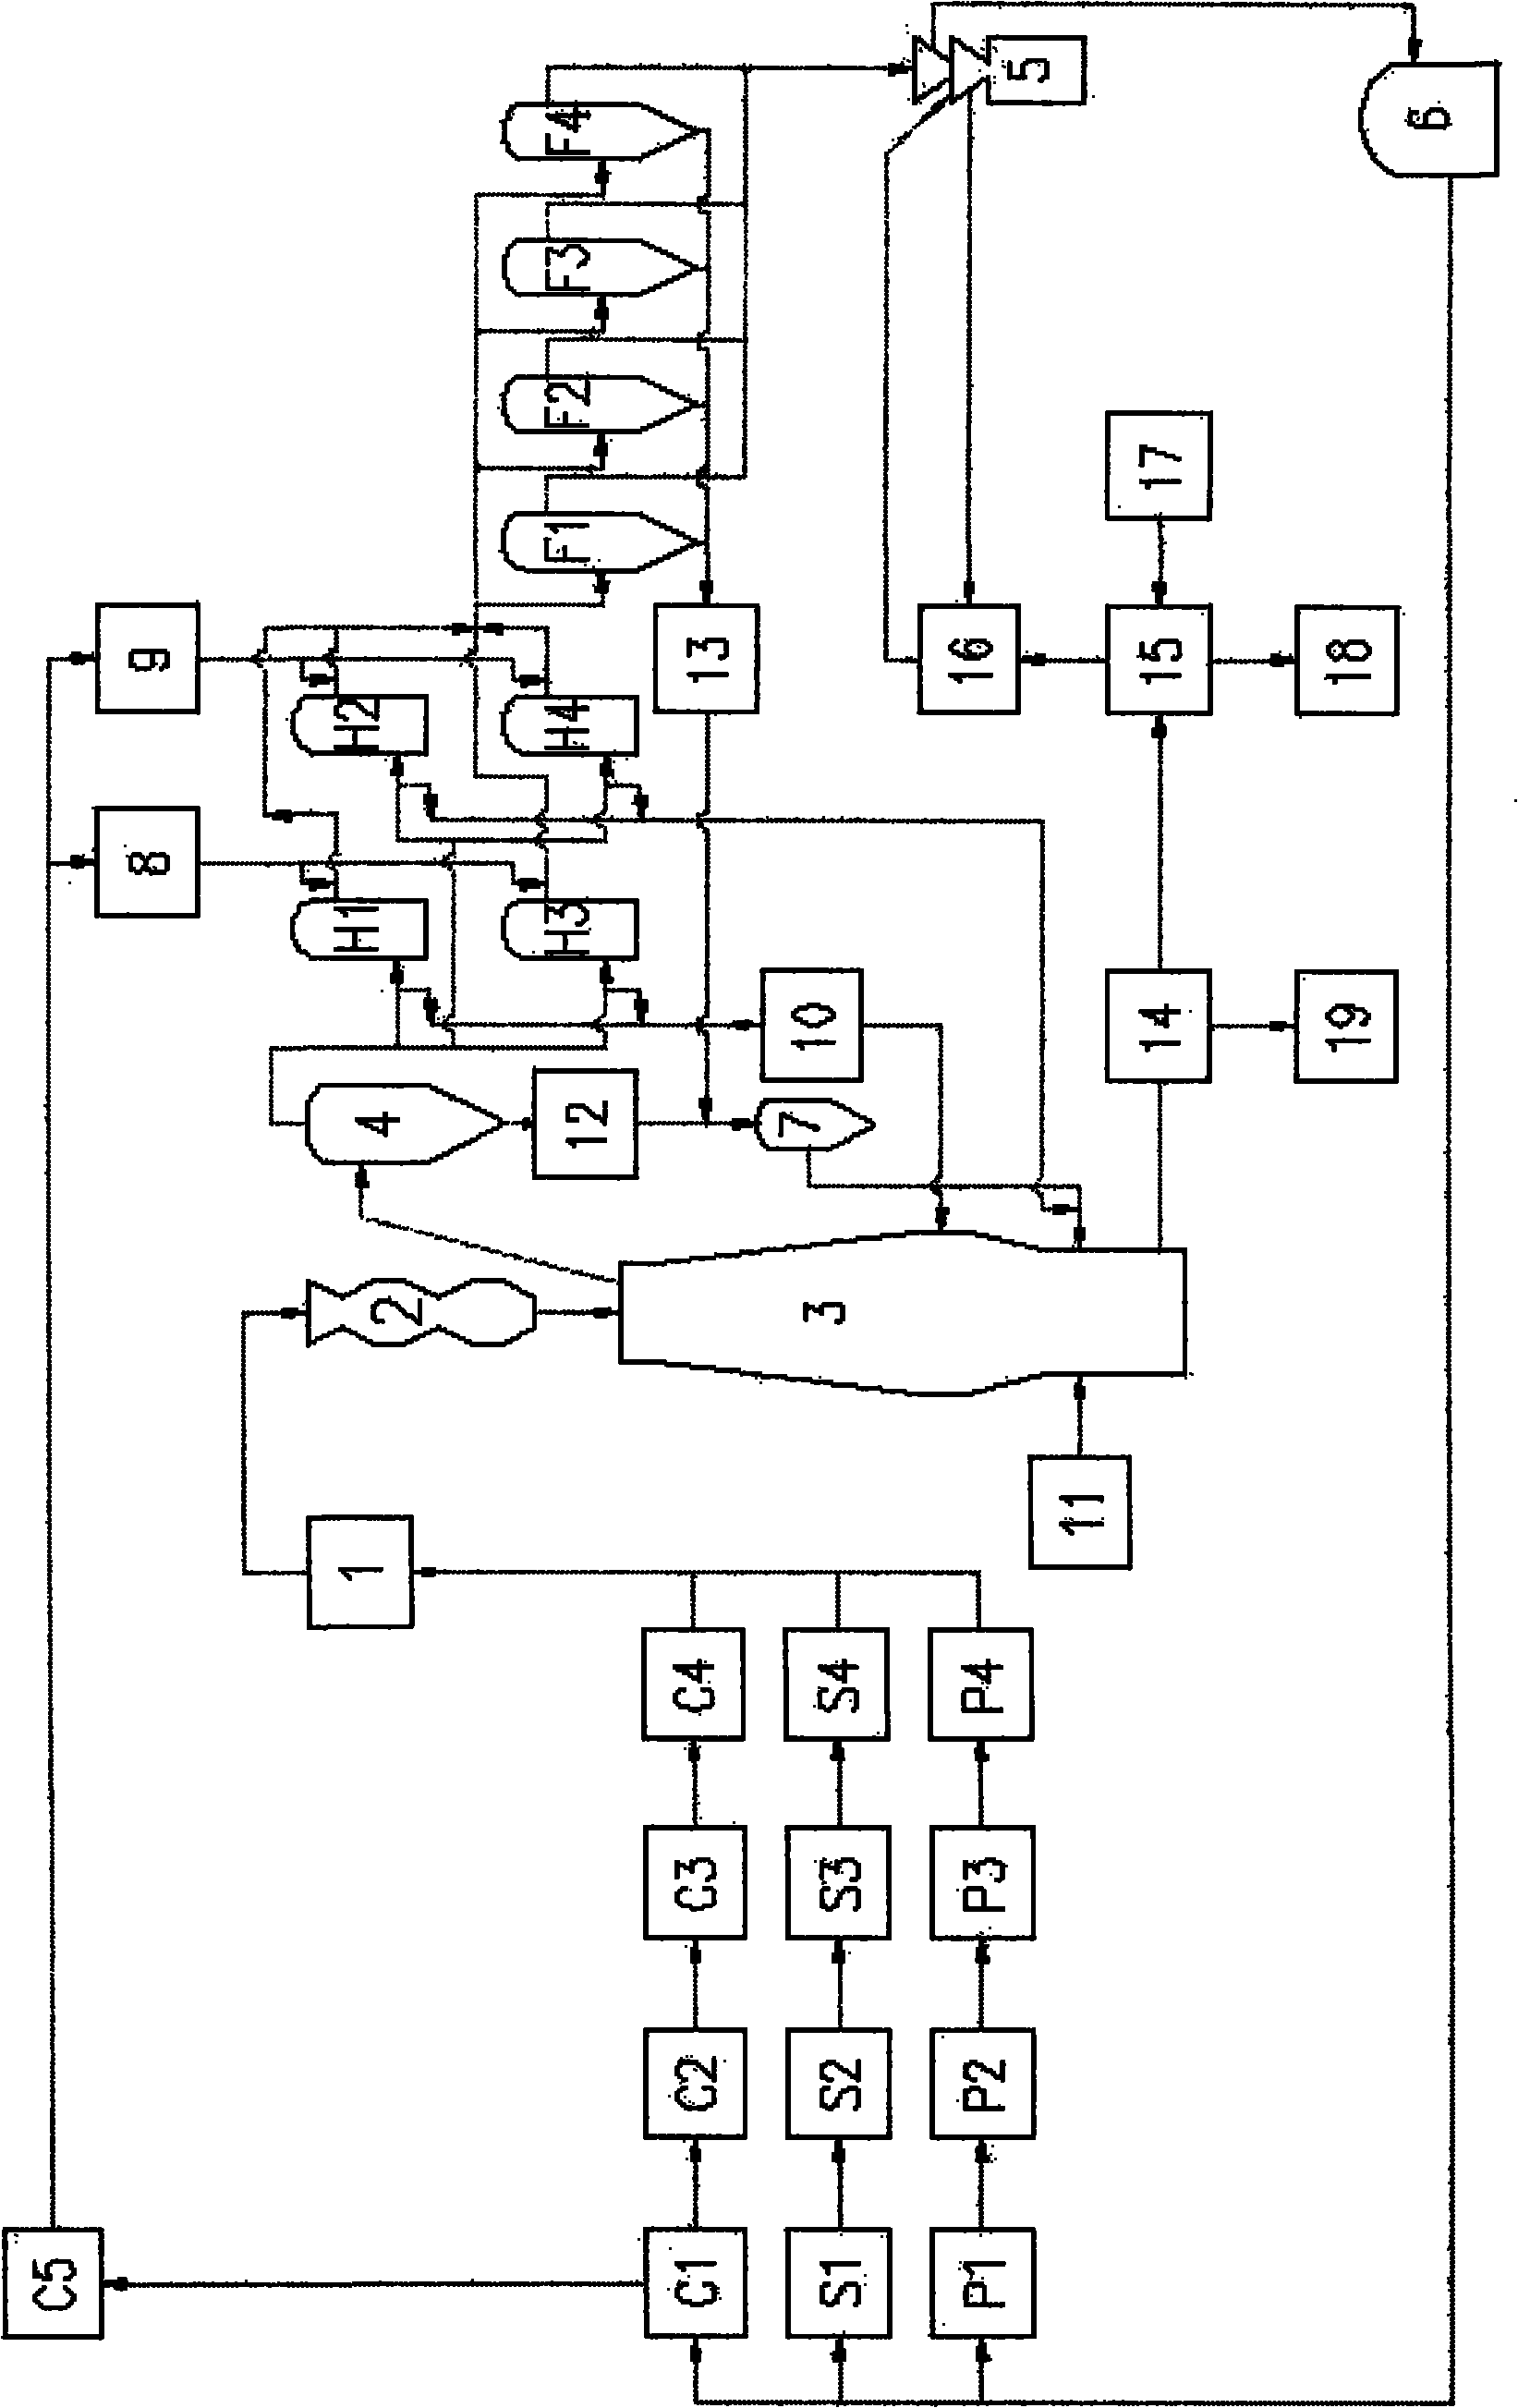 Method and device for smelting iron by using pure-oxygen and hydrogen-rich gas